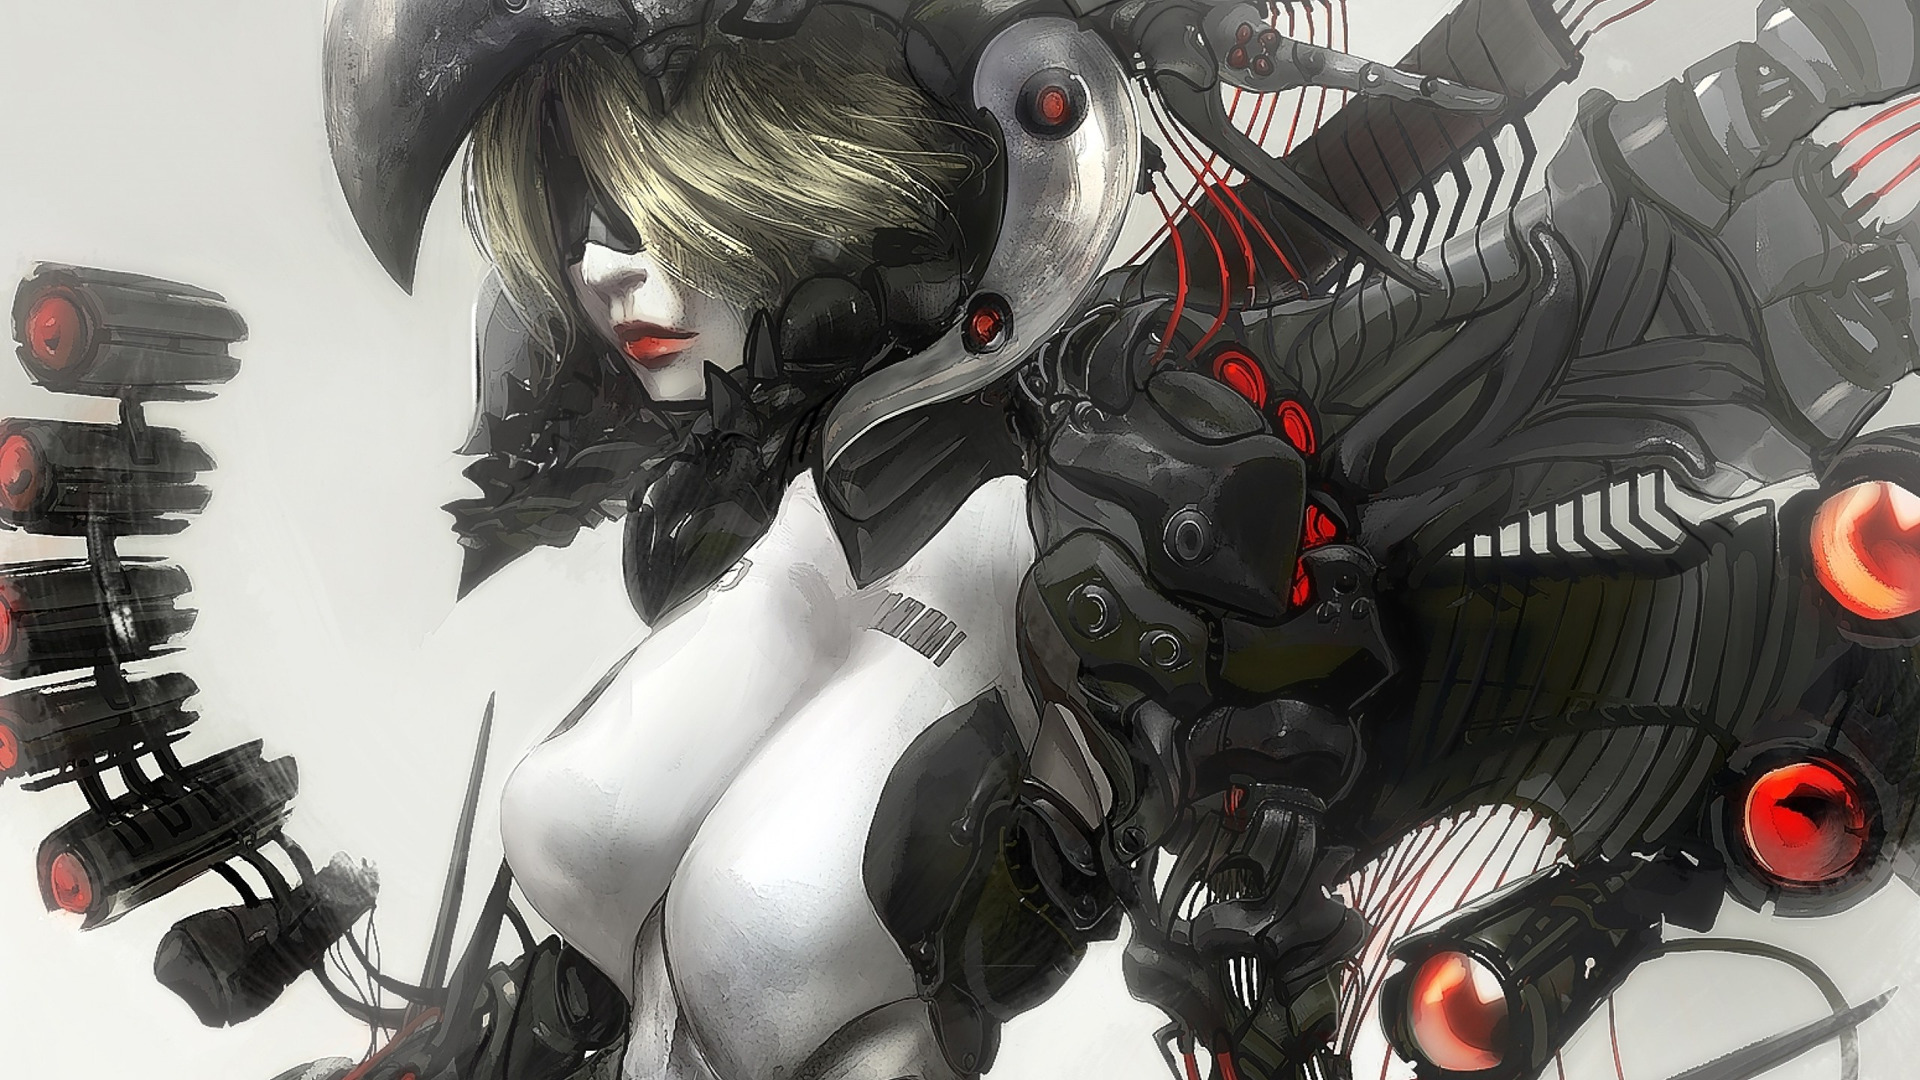 women, Cyborg, Artwork, Fantasy Art, Ghost In The Shell, Androids Wallpaper